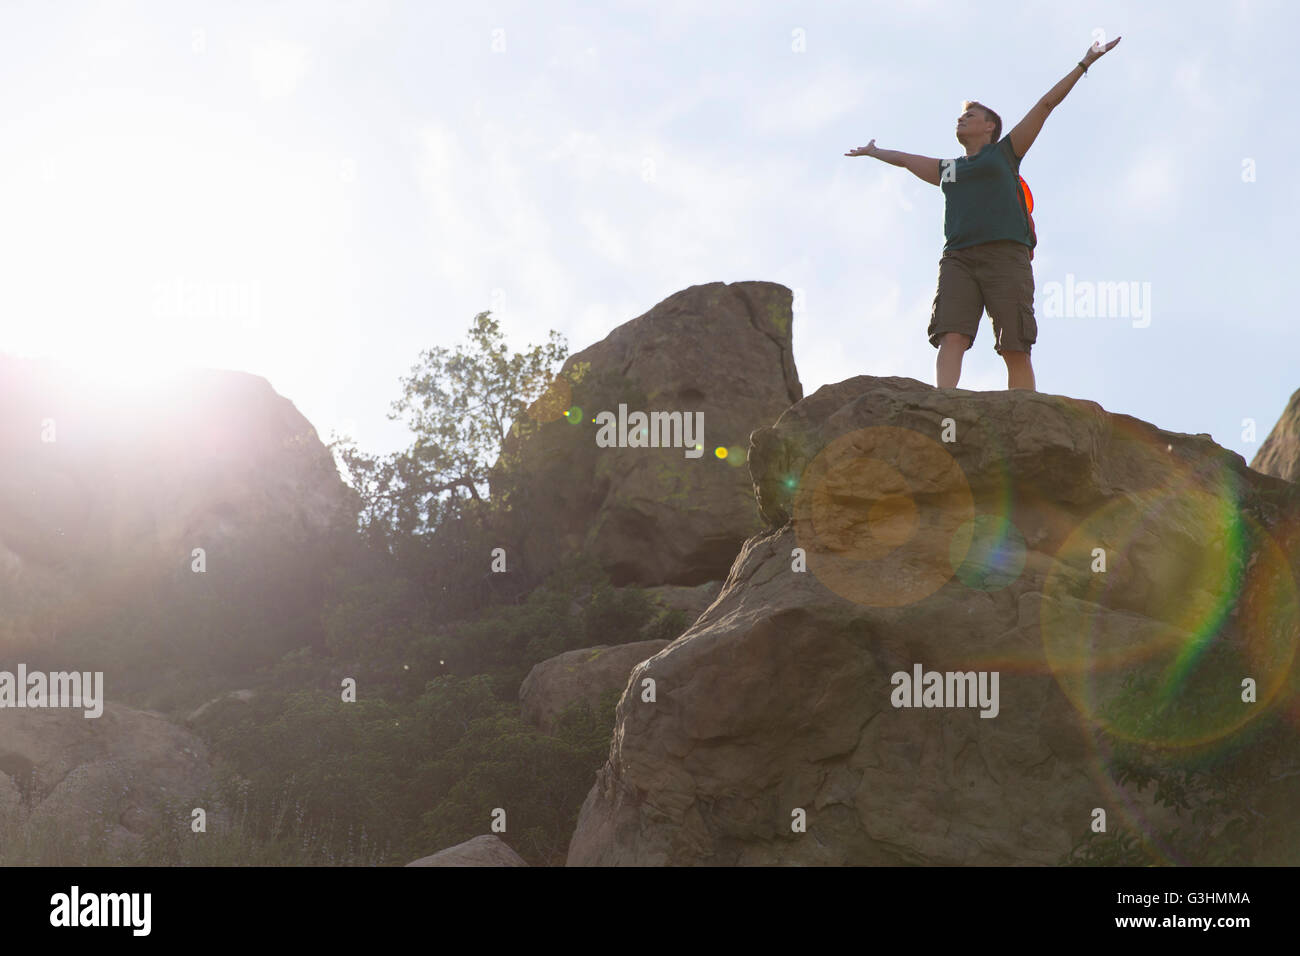 Woman hiker on top of rocks arms raised Stock Photo